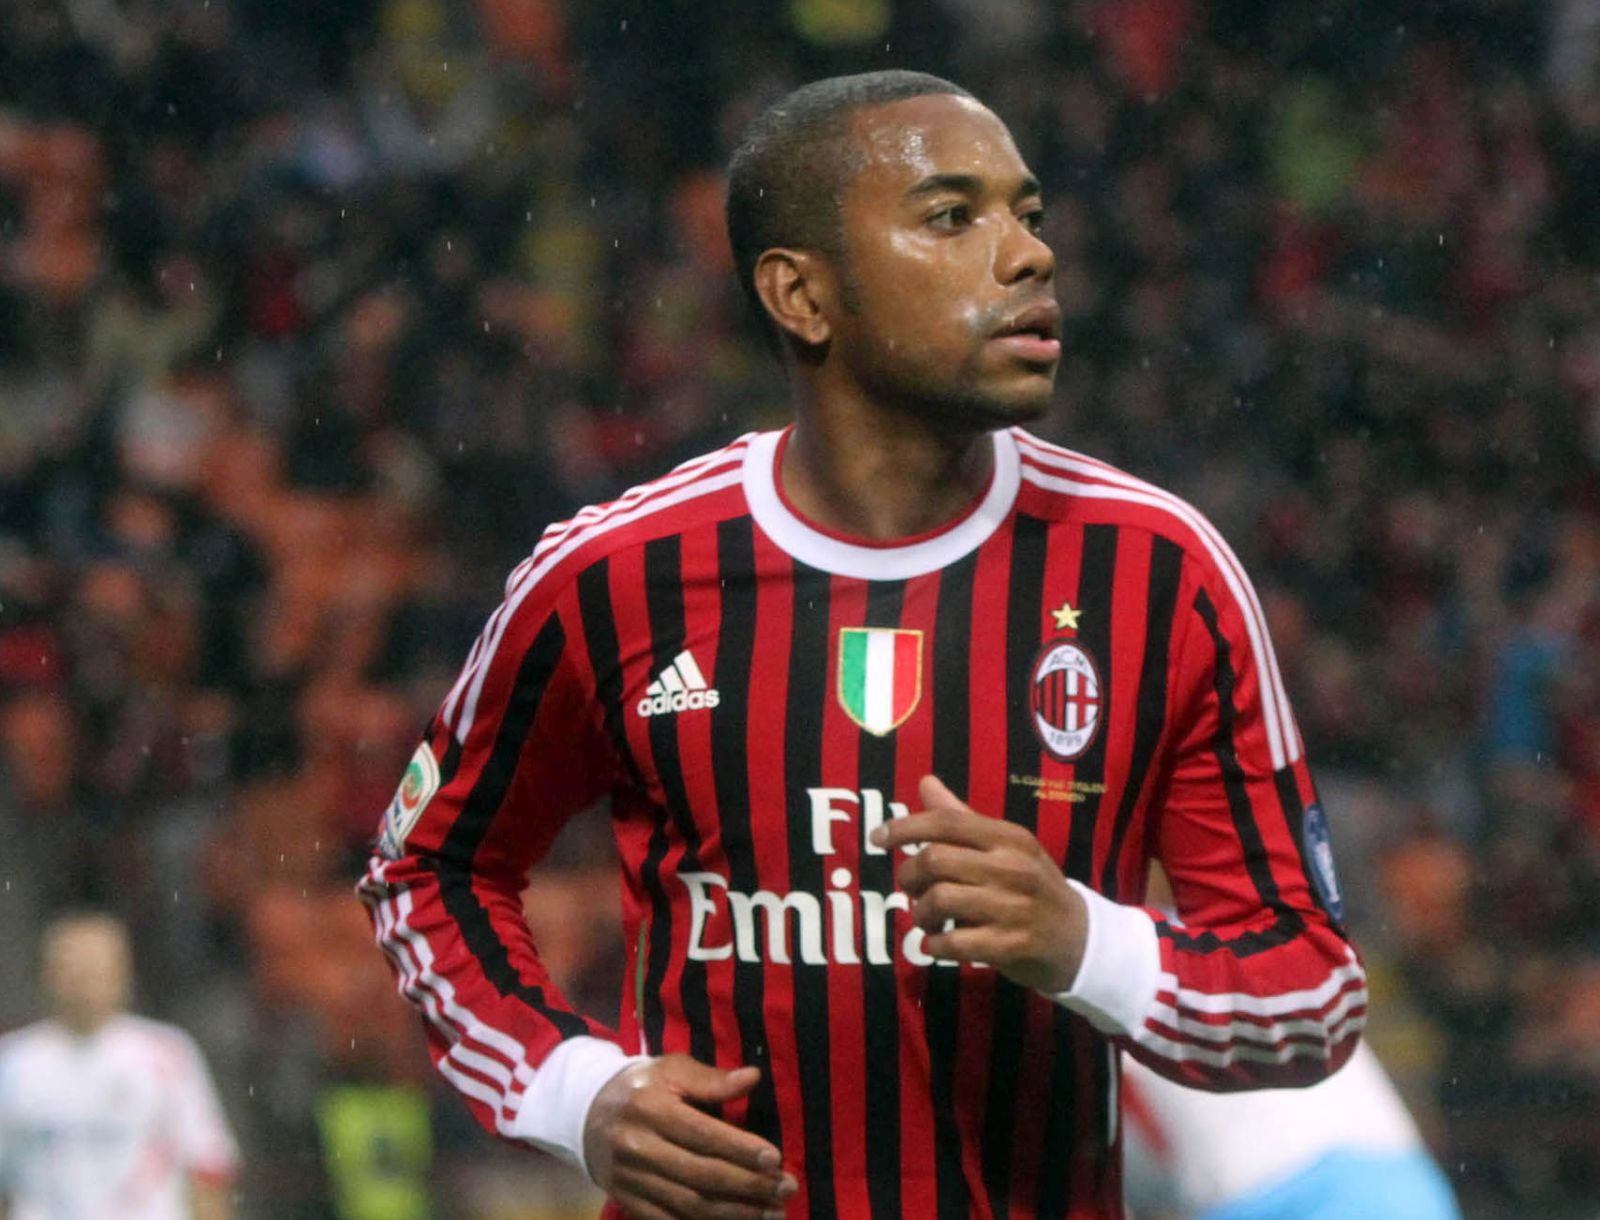 epa09696850 (FILE) - AC Milan's Brazilian forward Robinho celebrates after scoring the 2-0 during the Serie A soccer match between AC Milan and Catania at the Giuseppe Meazza stadium, Milan, Italy, 06 November 2011 (reissued 20 Januart 2022). Italy's Supreme Court confirmed on 19 January 2022 Robinho's nine-year prison sentence for sexually assaulting a woman. The assault took place in 2013 when Robinho was playing for AC Milan. Robinho was convicted of rape in 2017 and received a nine-year prison sentence. With the ruling of the Supreme Court the appeals process has finished. Robinho is living in Brazil and it is currently unclear whether he will serve his sentence at all as the Brazilian constitution bans the extradition of its citizens.  EPA/MATTEO BAZZI *** Local Caption *** 50105905